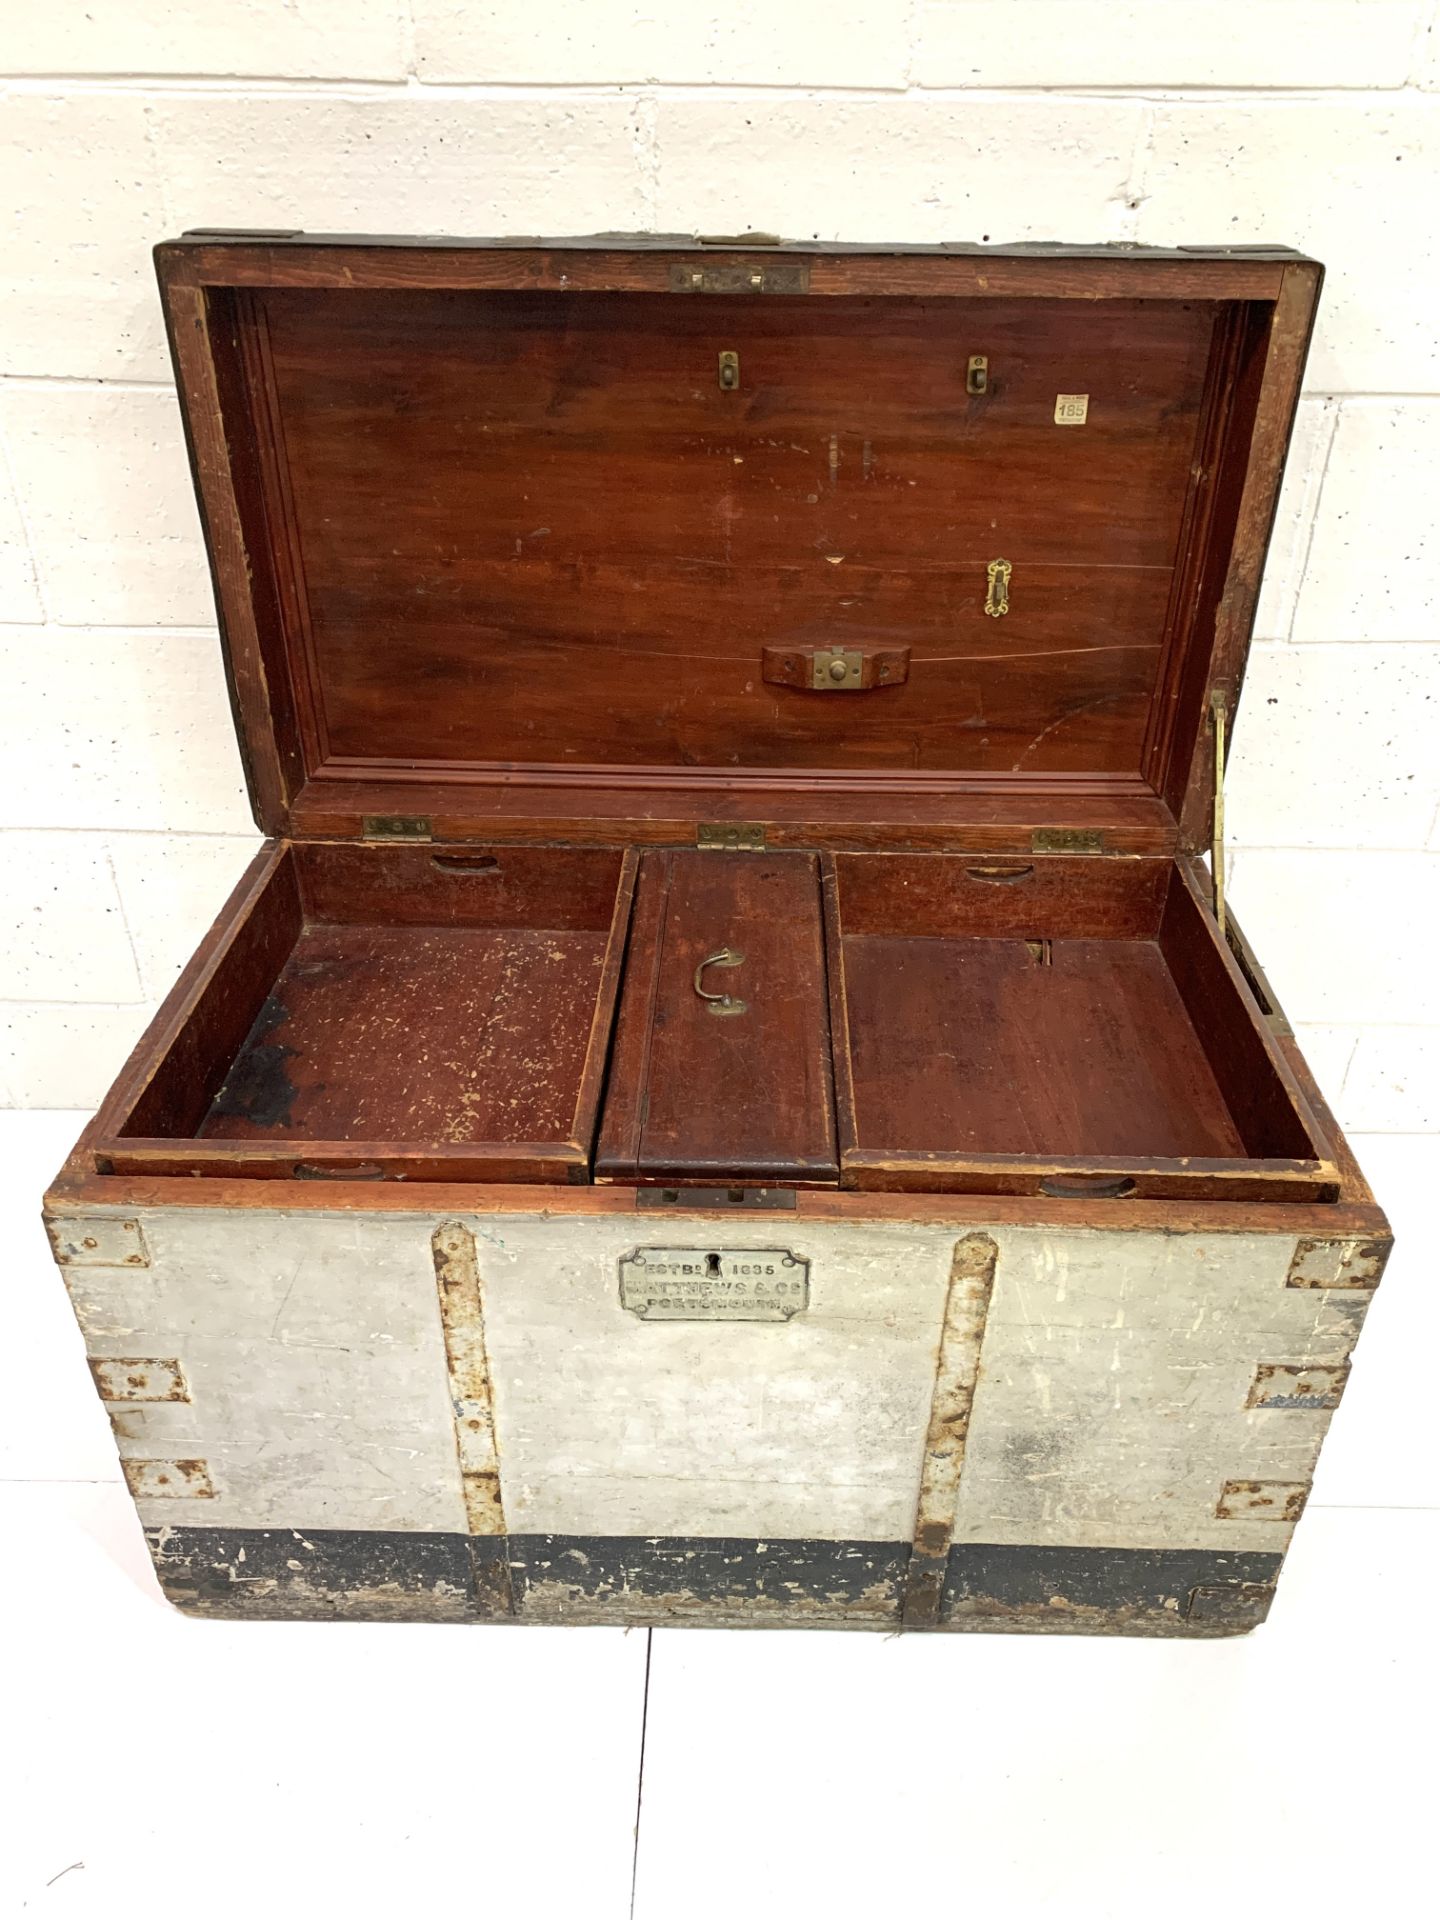 19th Century metal bound trunk by Matthews and Co. of Portsmouth - Image 5 of 6